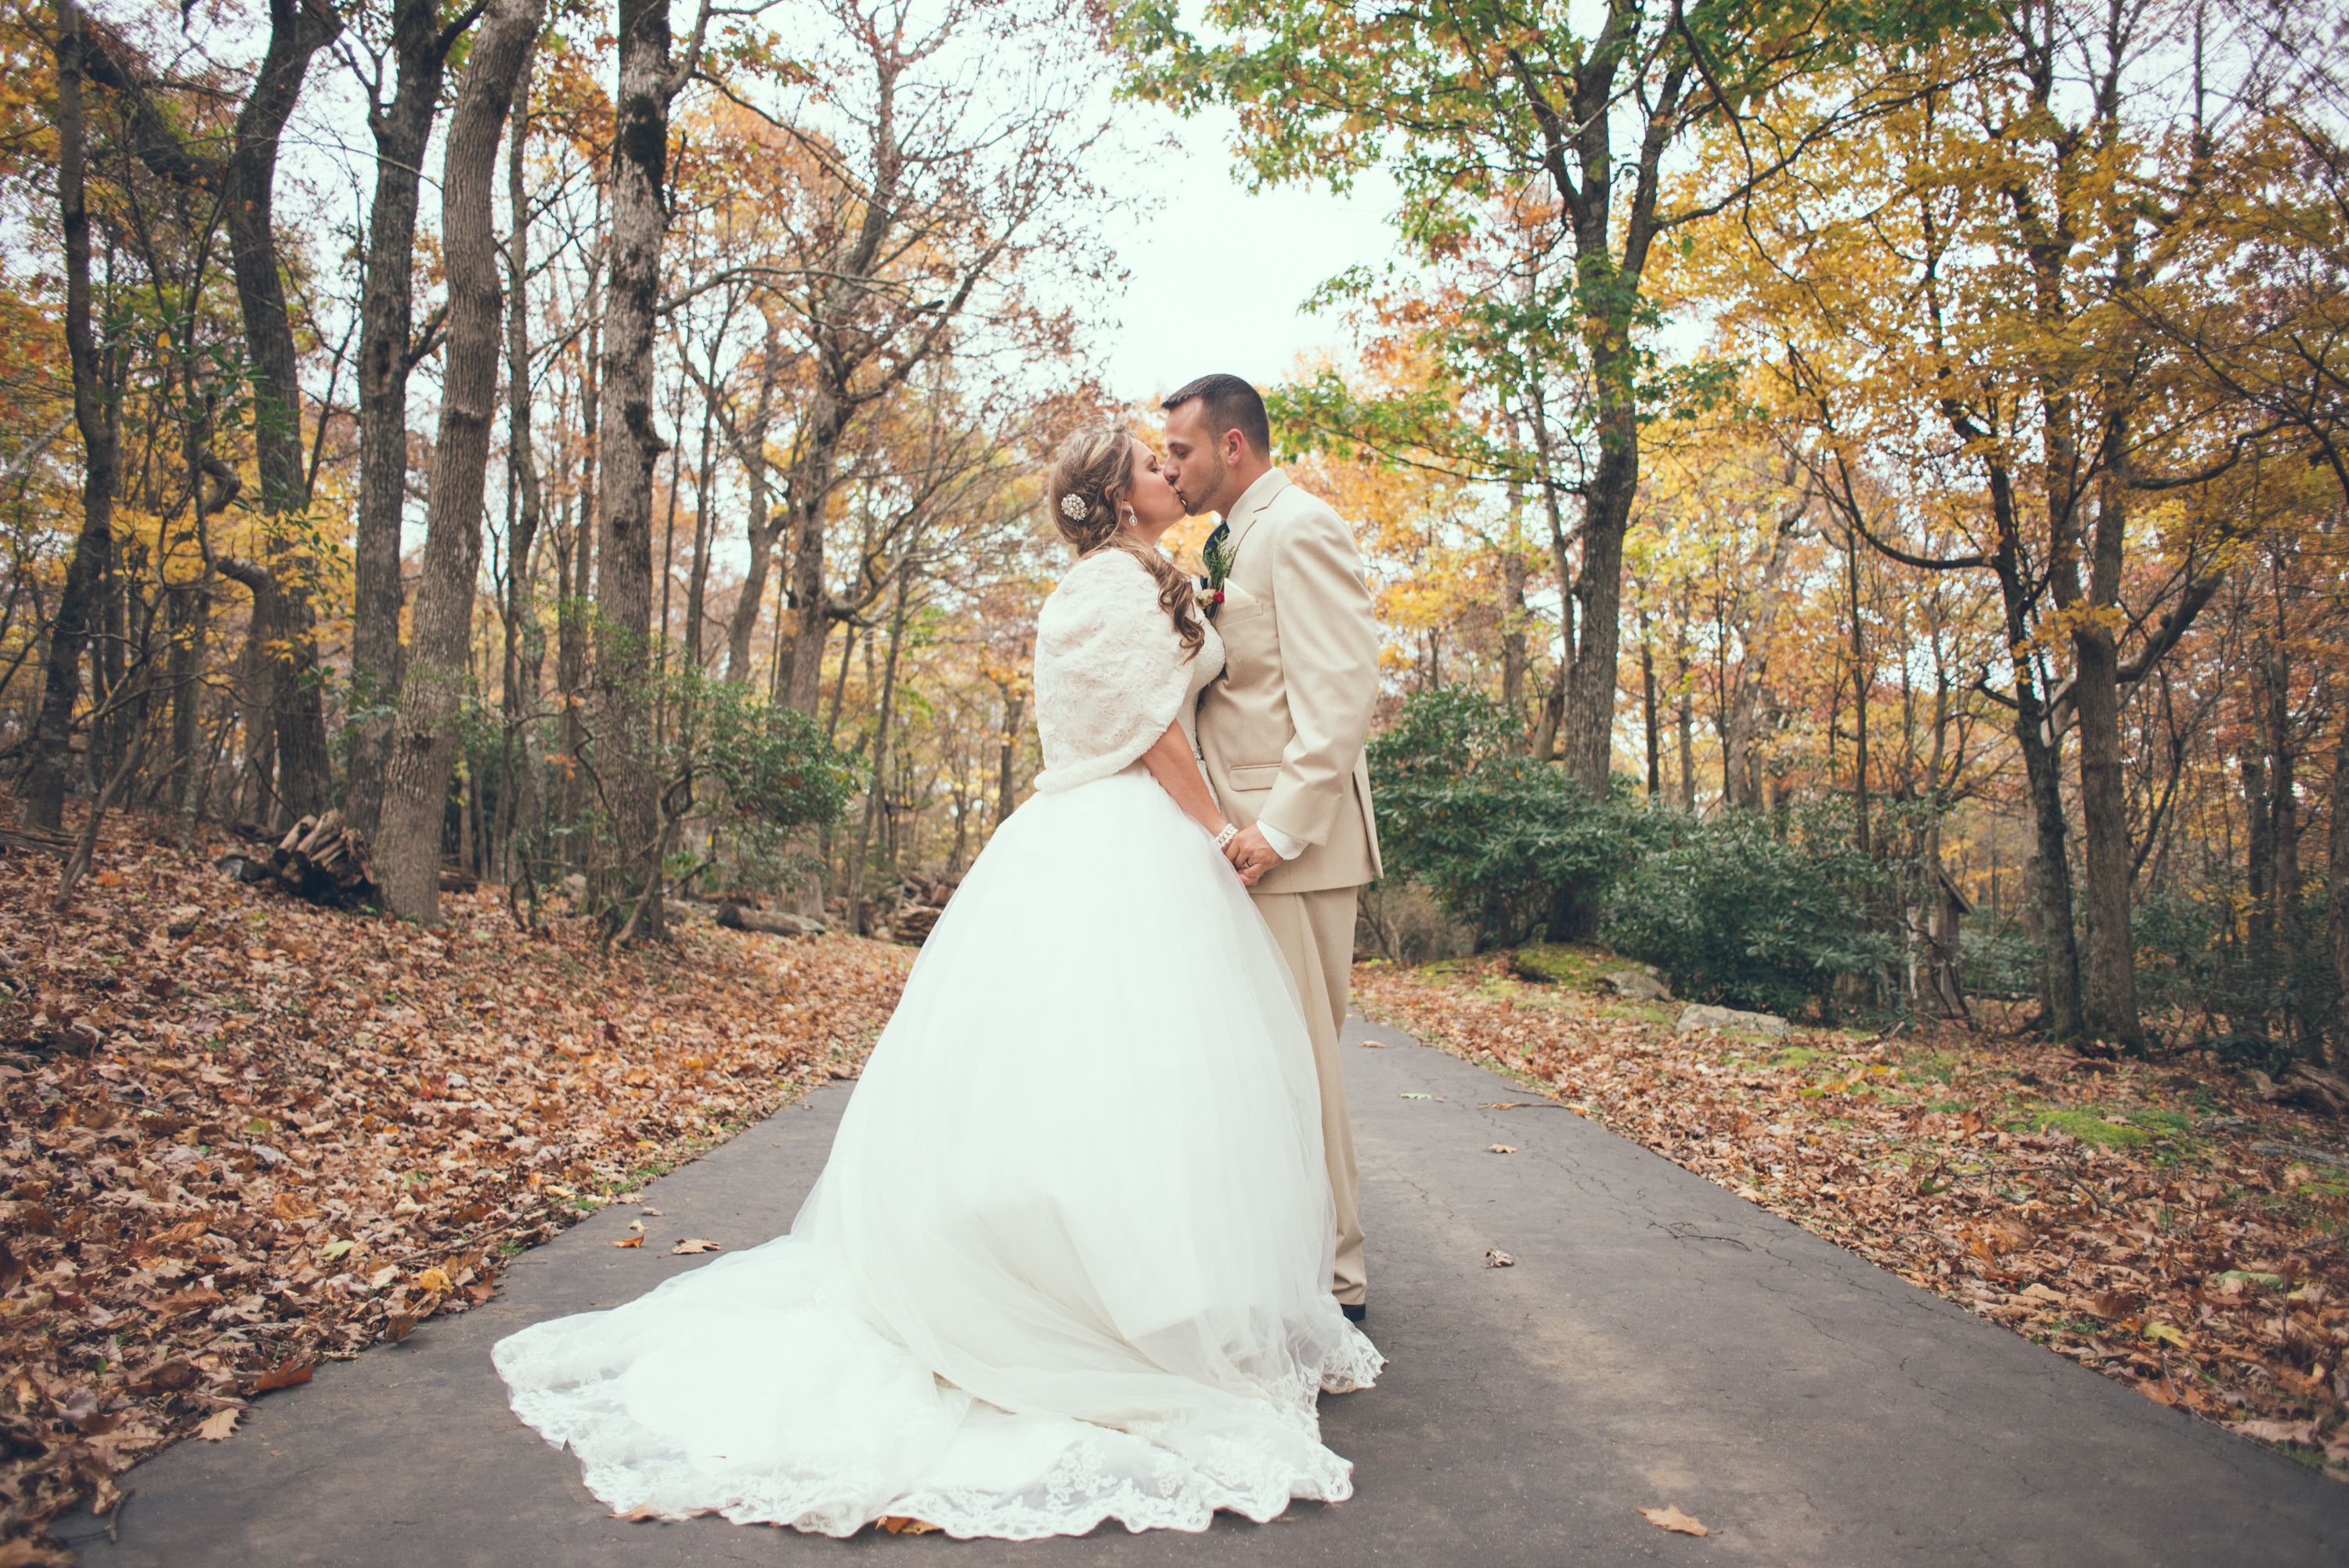 How To Find The Right Photographer For Your Wedding Day Joyelan